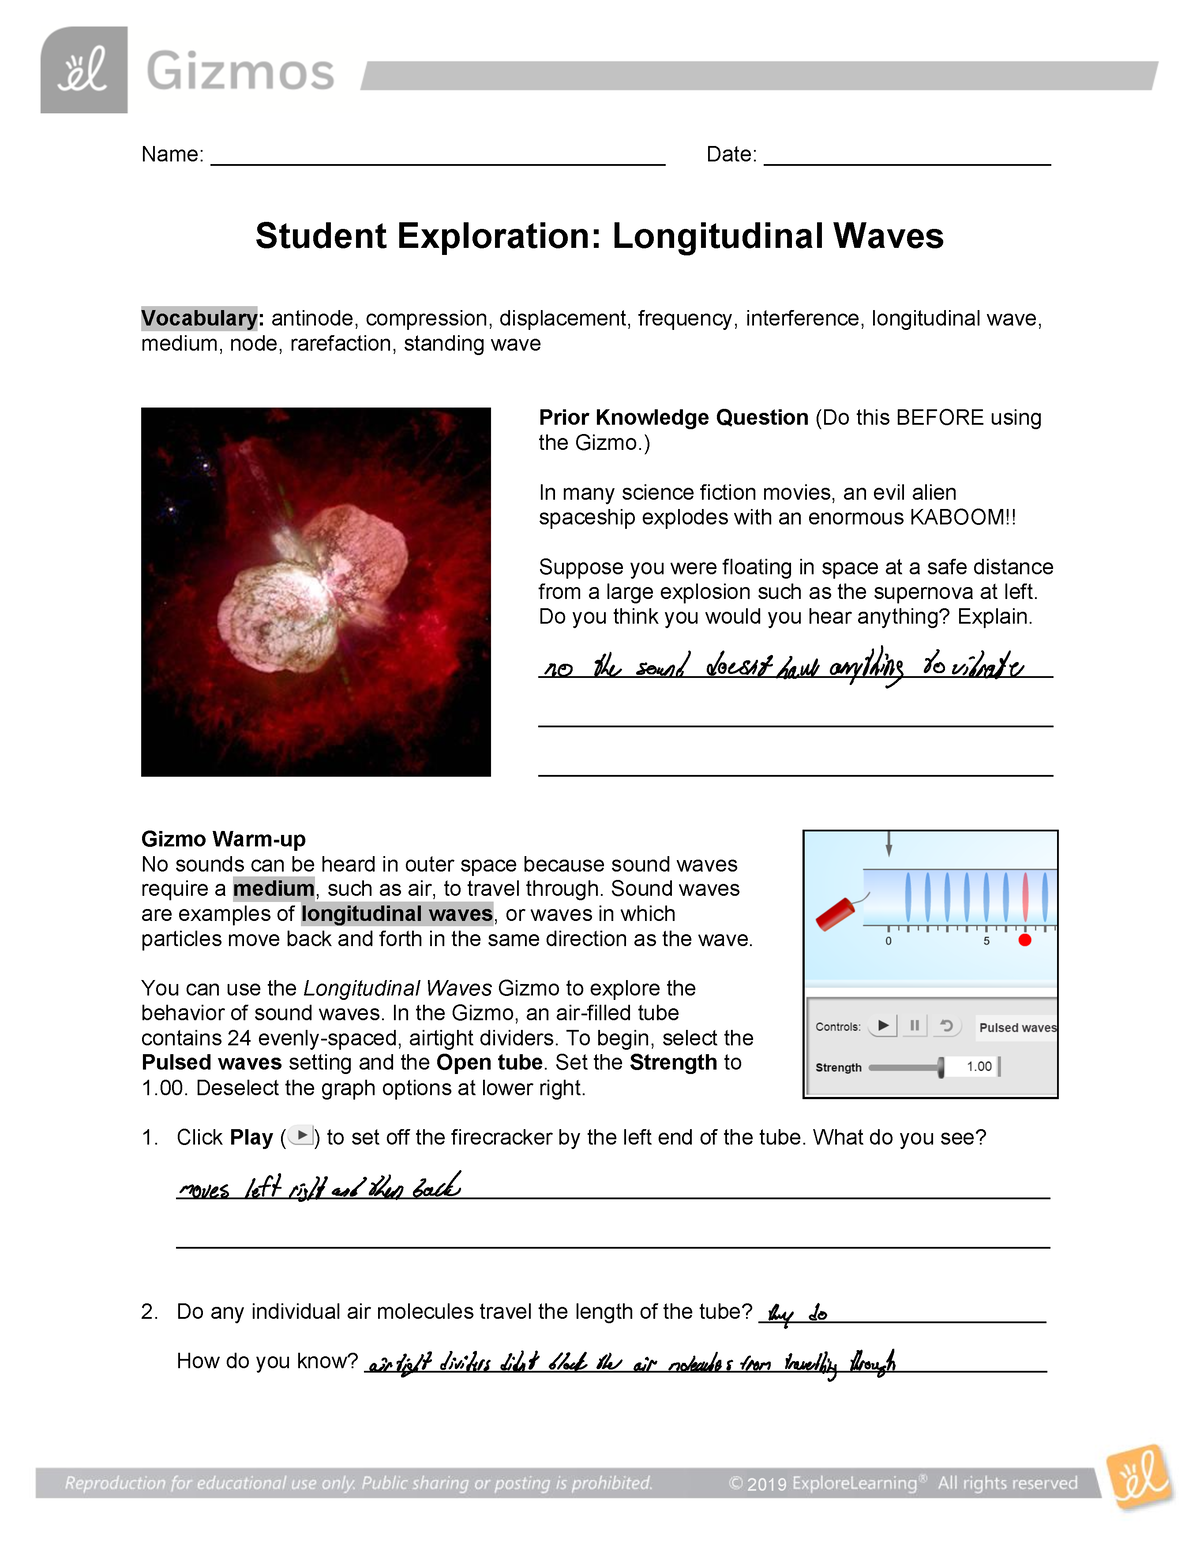 longitudinal-waves-gizmos-worksheet-with-100-correct-answers-6-pages